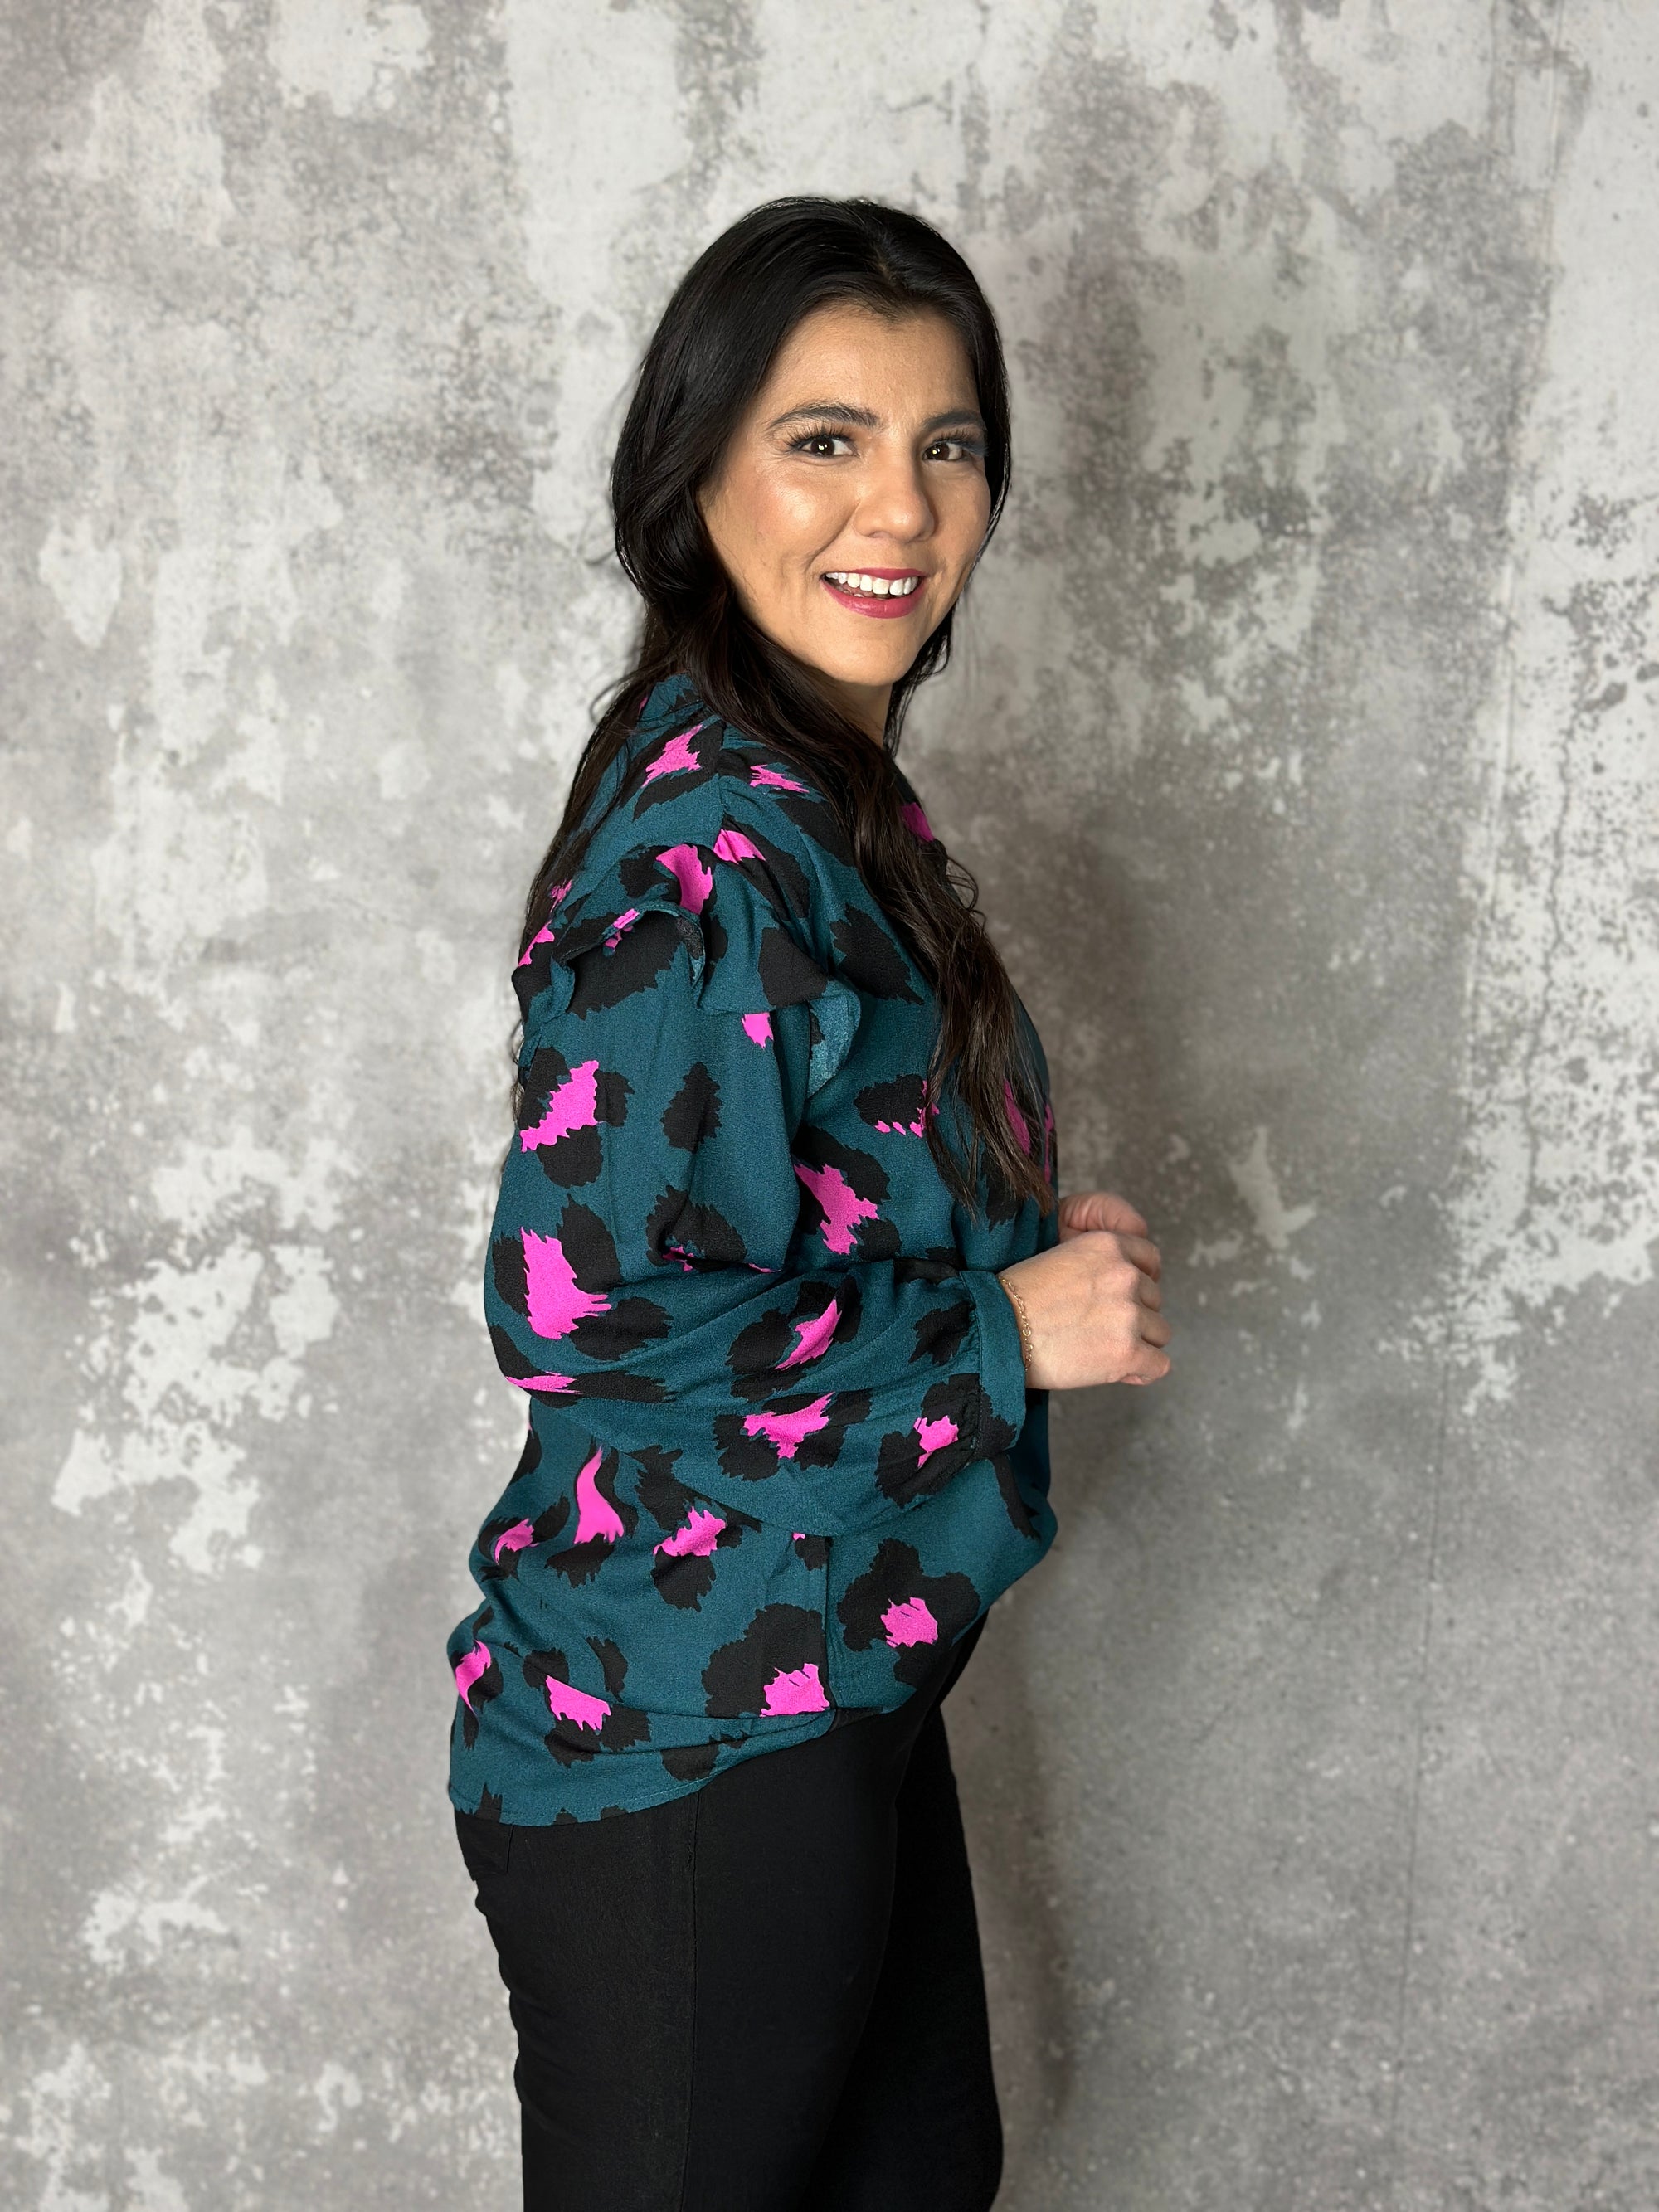 Teal Leopard Ruffle Blouse (Small - 3X)